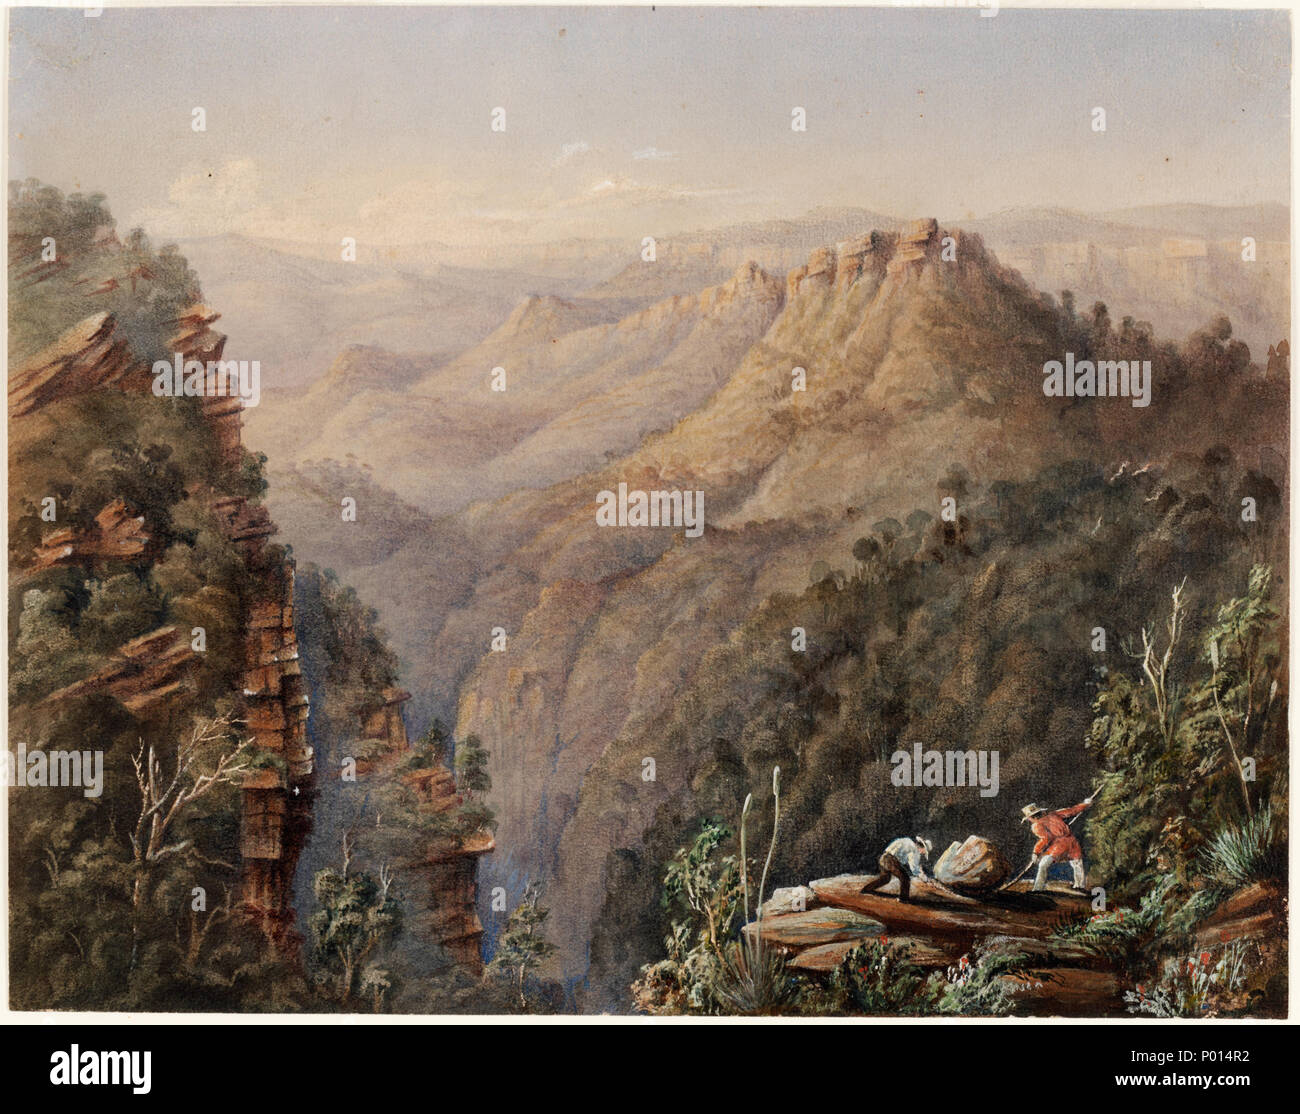 . English: Watercolour image of a road to Bathurst, showing a waterfall.  . 23 May 2013, 13:40:46. Frederick Charles Terry 2 Waterfall on the road to Bathurst Oct i.e. October 20 1851 a1528538u Stock Photo